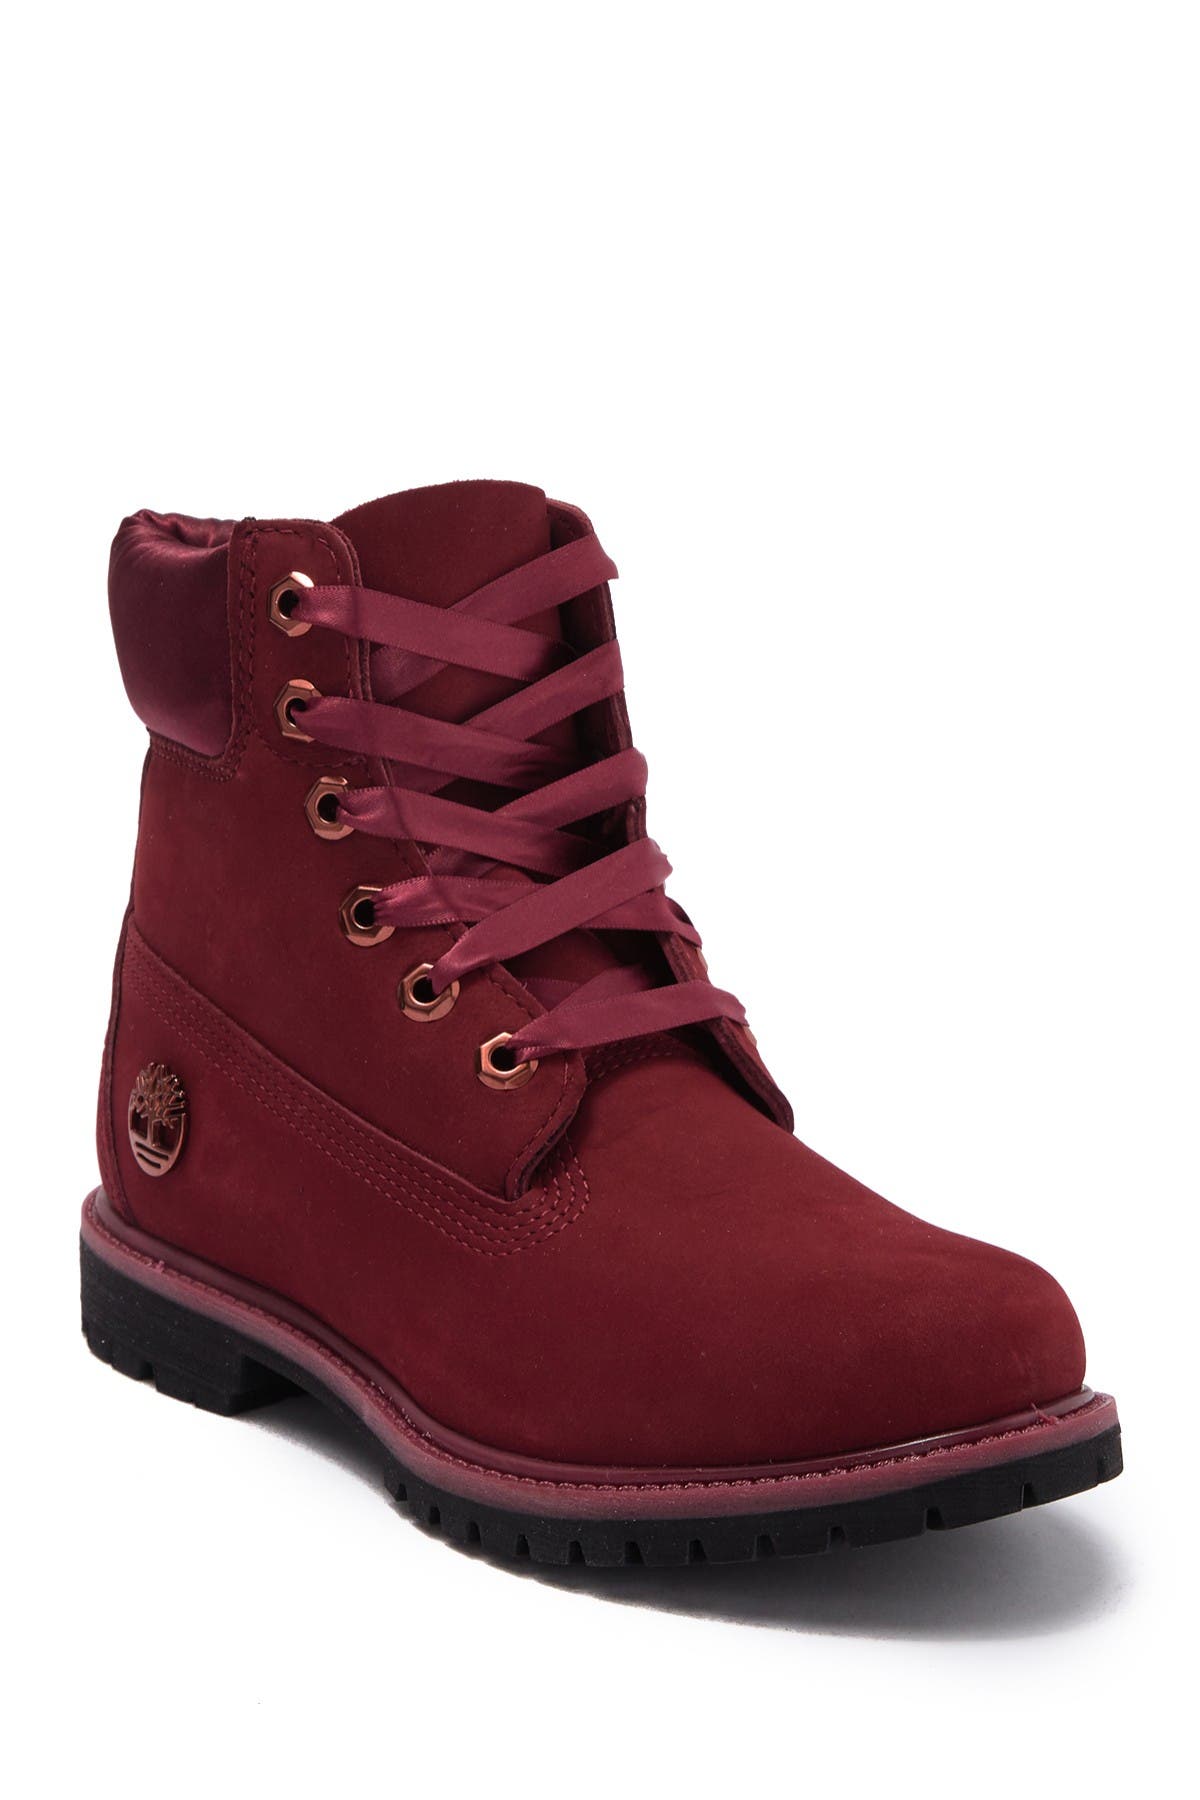 womens timberland boots wide width